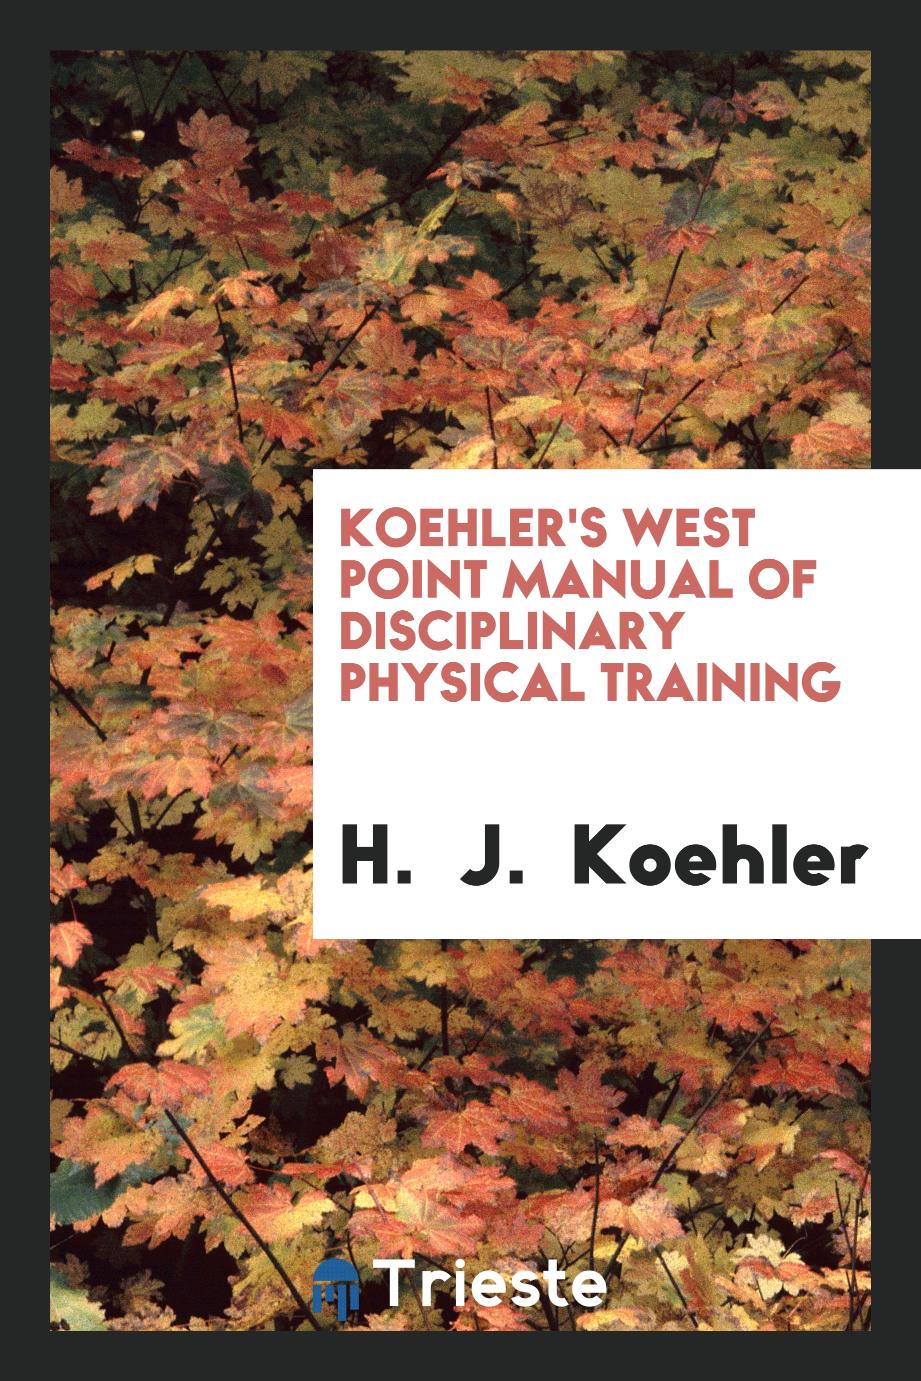 Koehler's West Point manual of disciplinary physical training